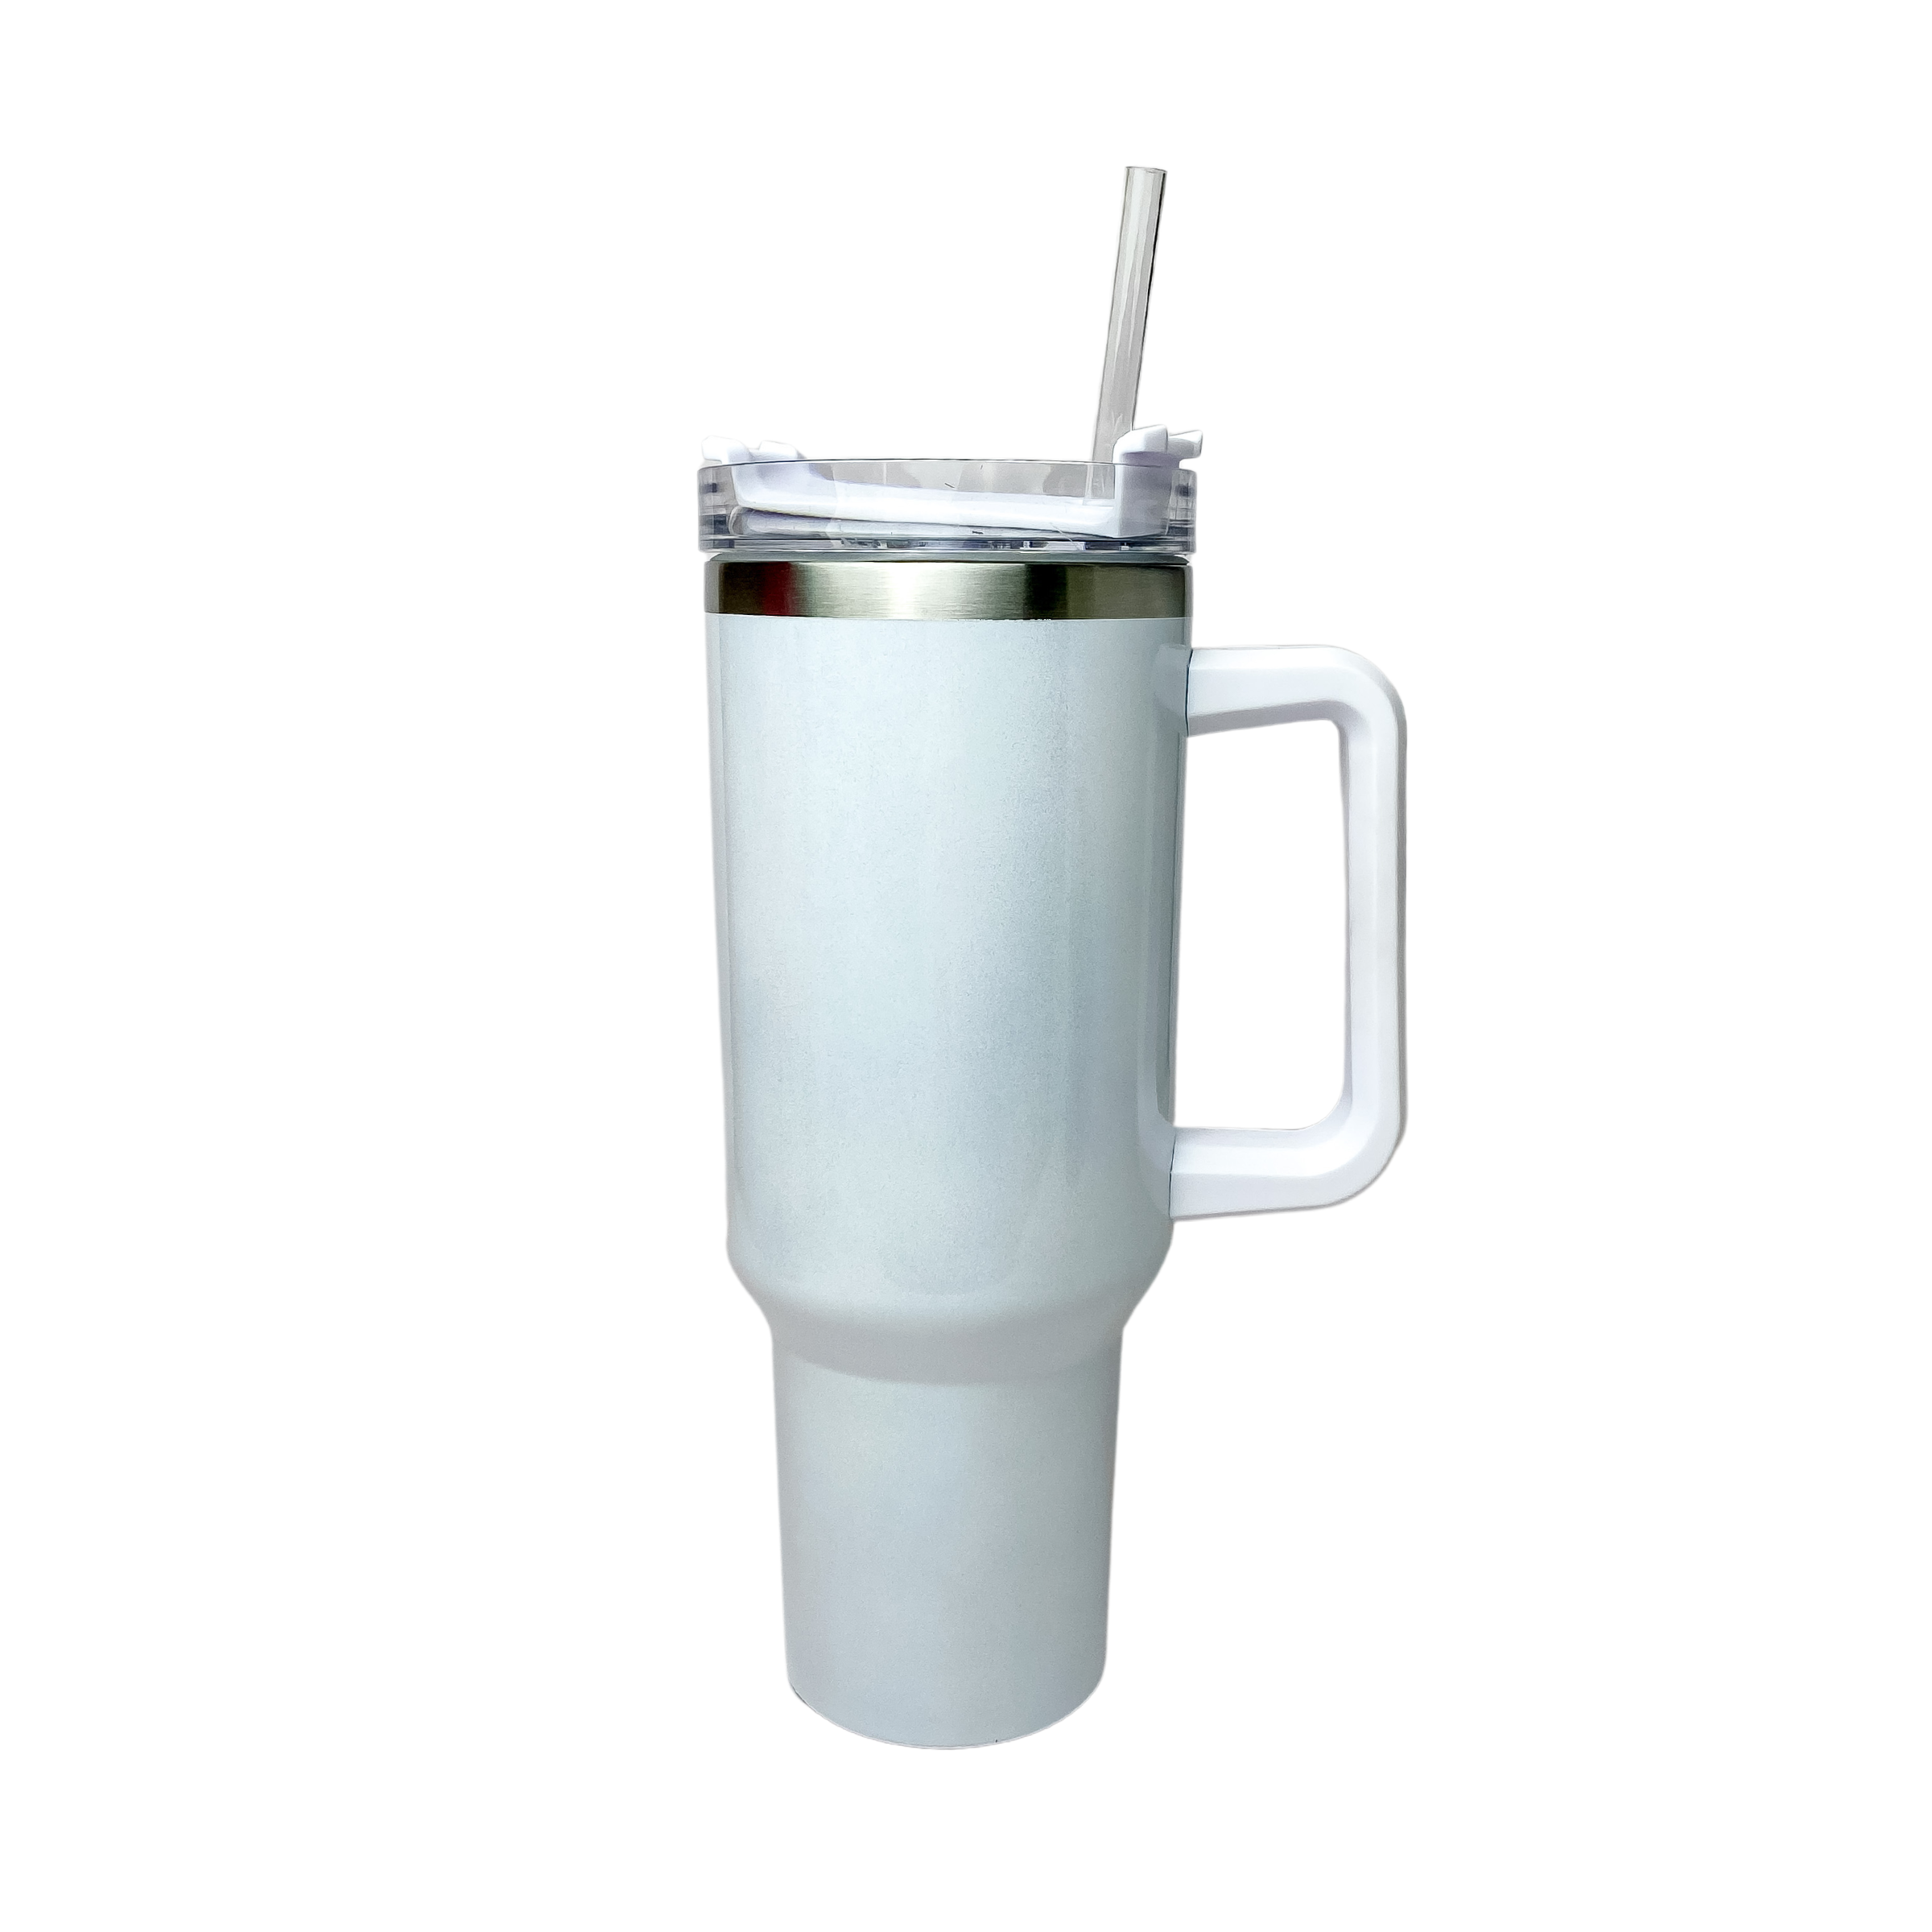 Pictured is a white shimmer tumbler with a handle and clear straw. This tumbler is pictured on a white background.